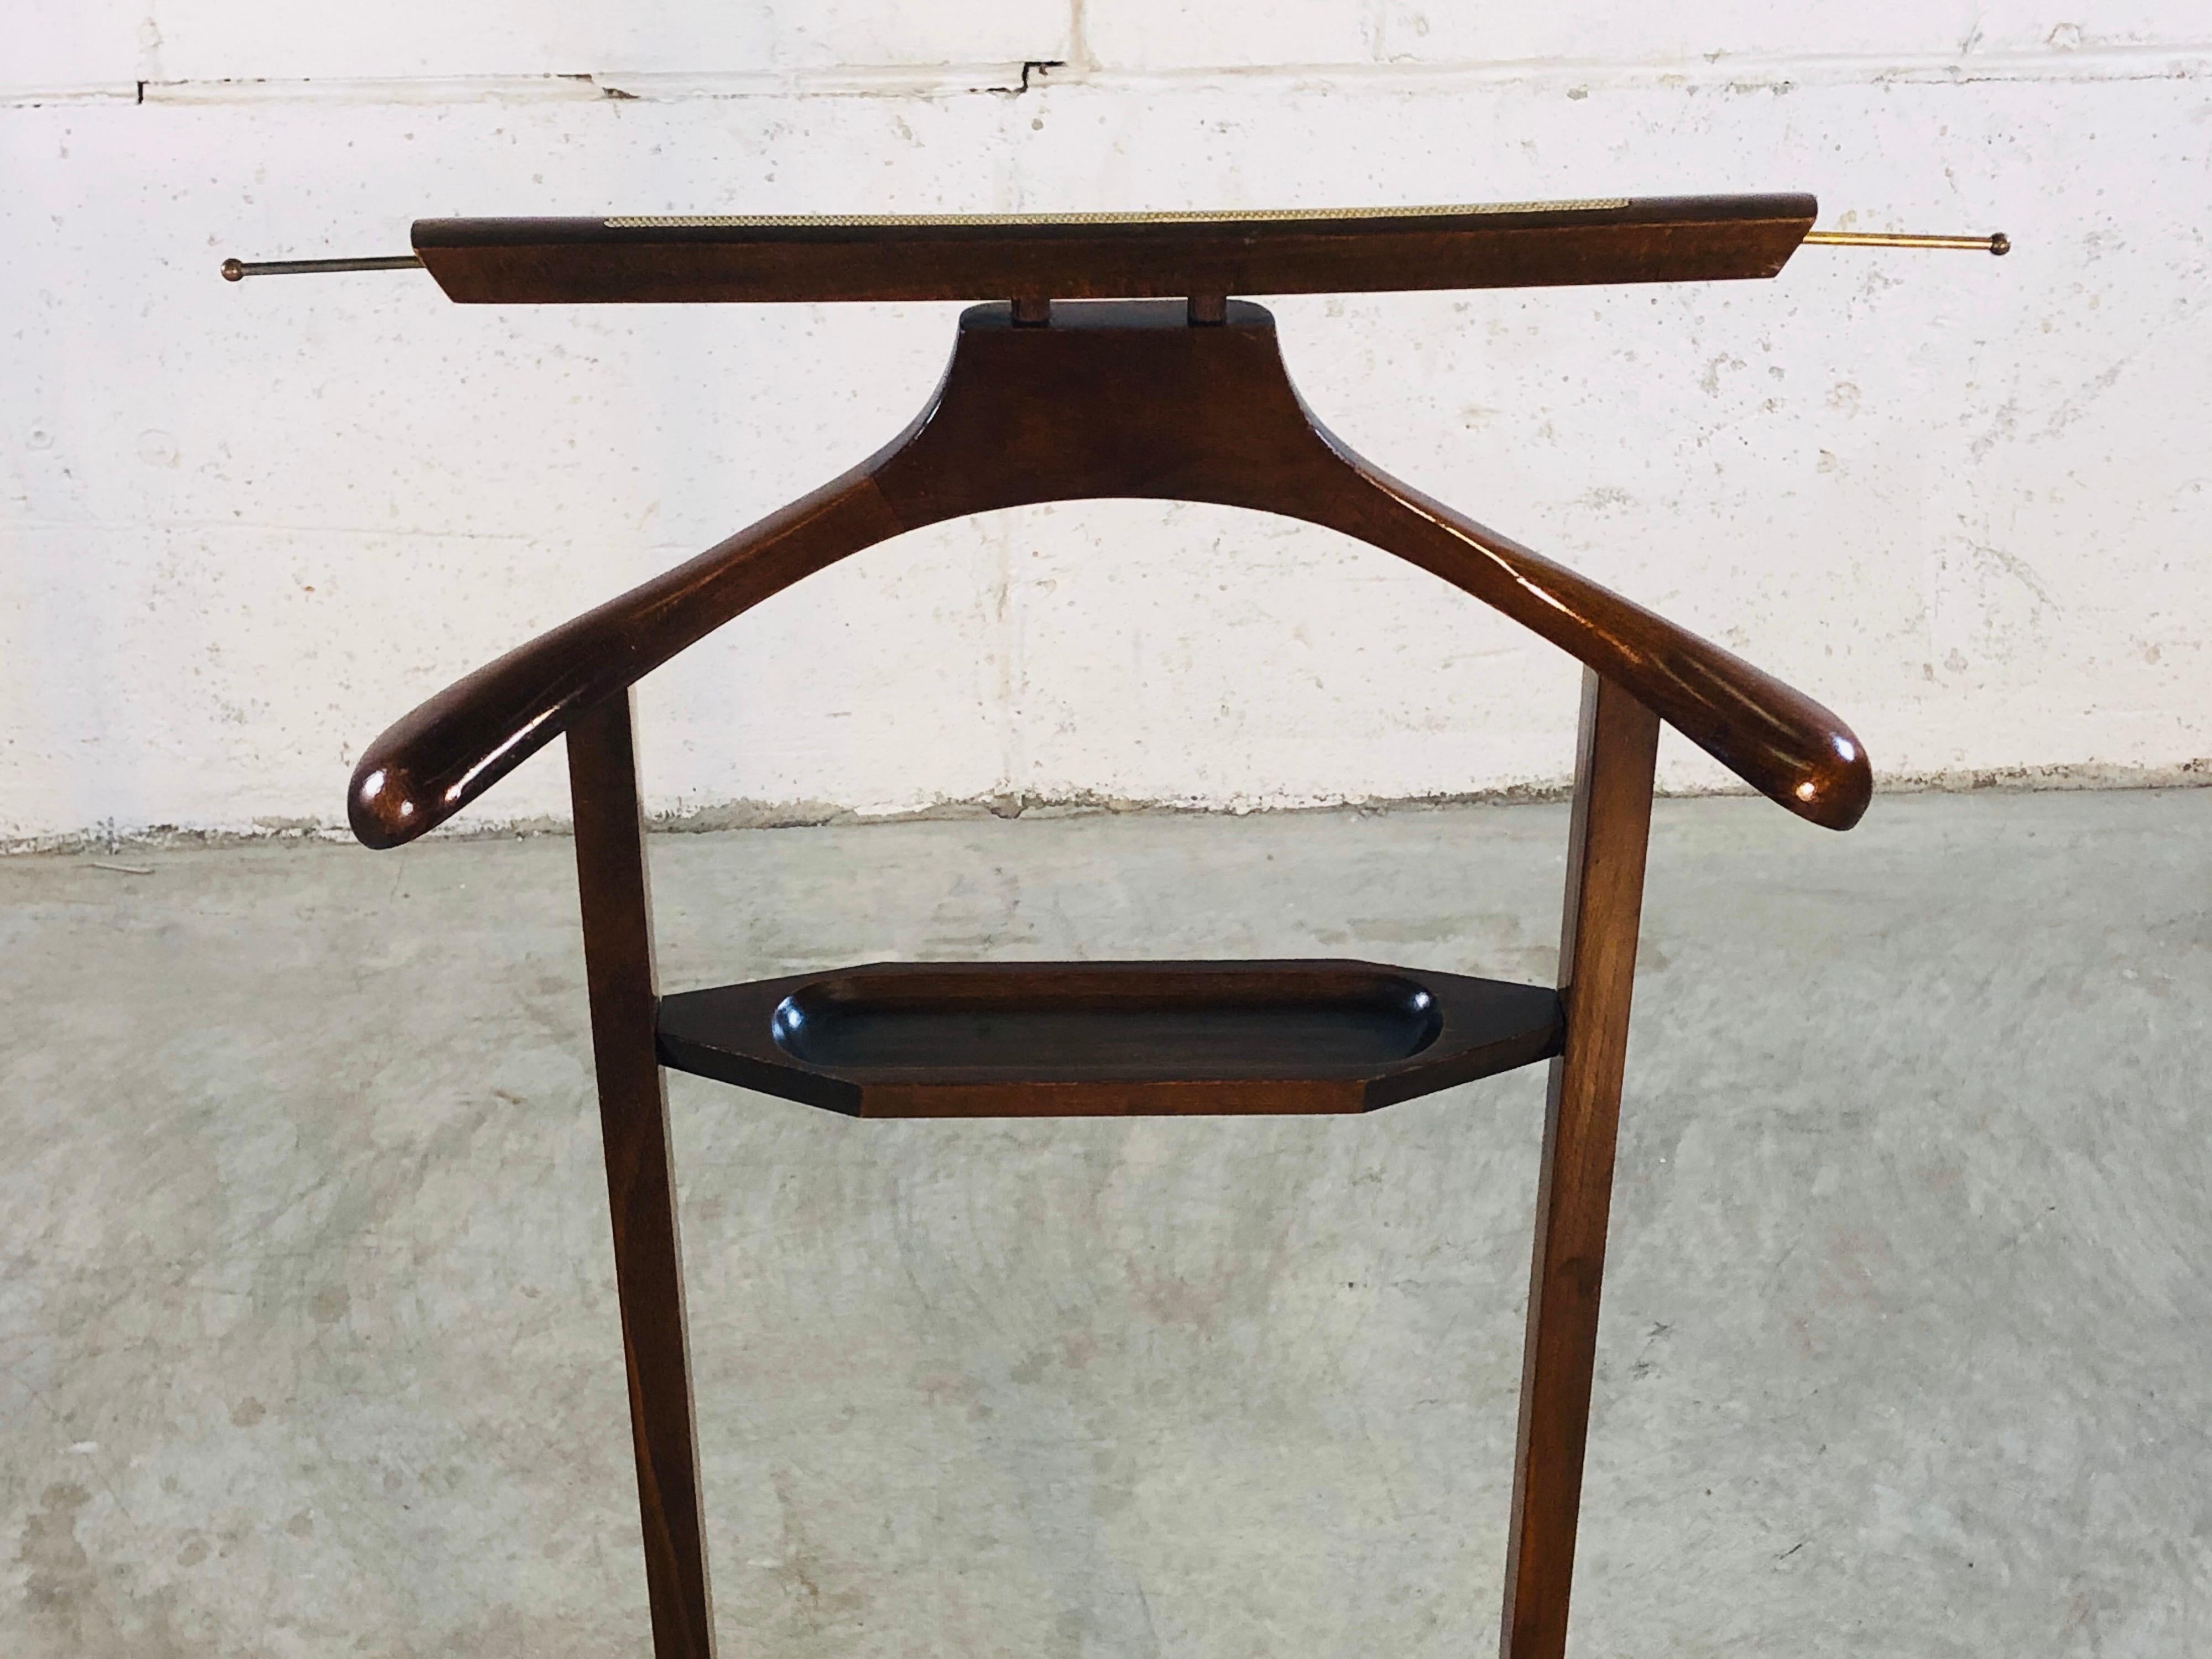 Vintage 1960s men’s Italian mahogany wood bedroom valet with side pulls for ties and a shelf for change and cufflinks. Marked underneath Made in Italy.